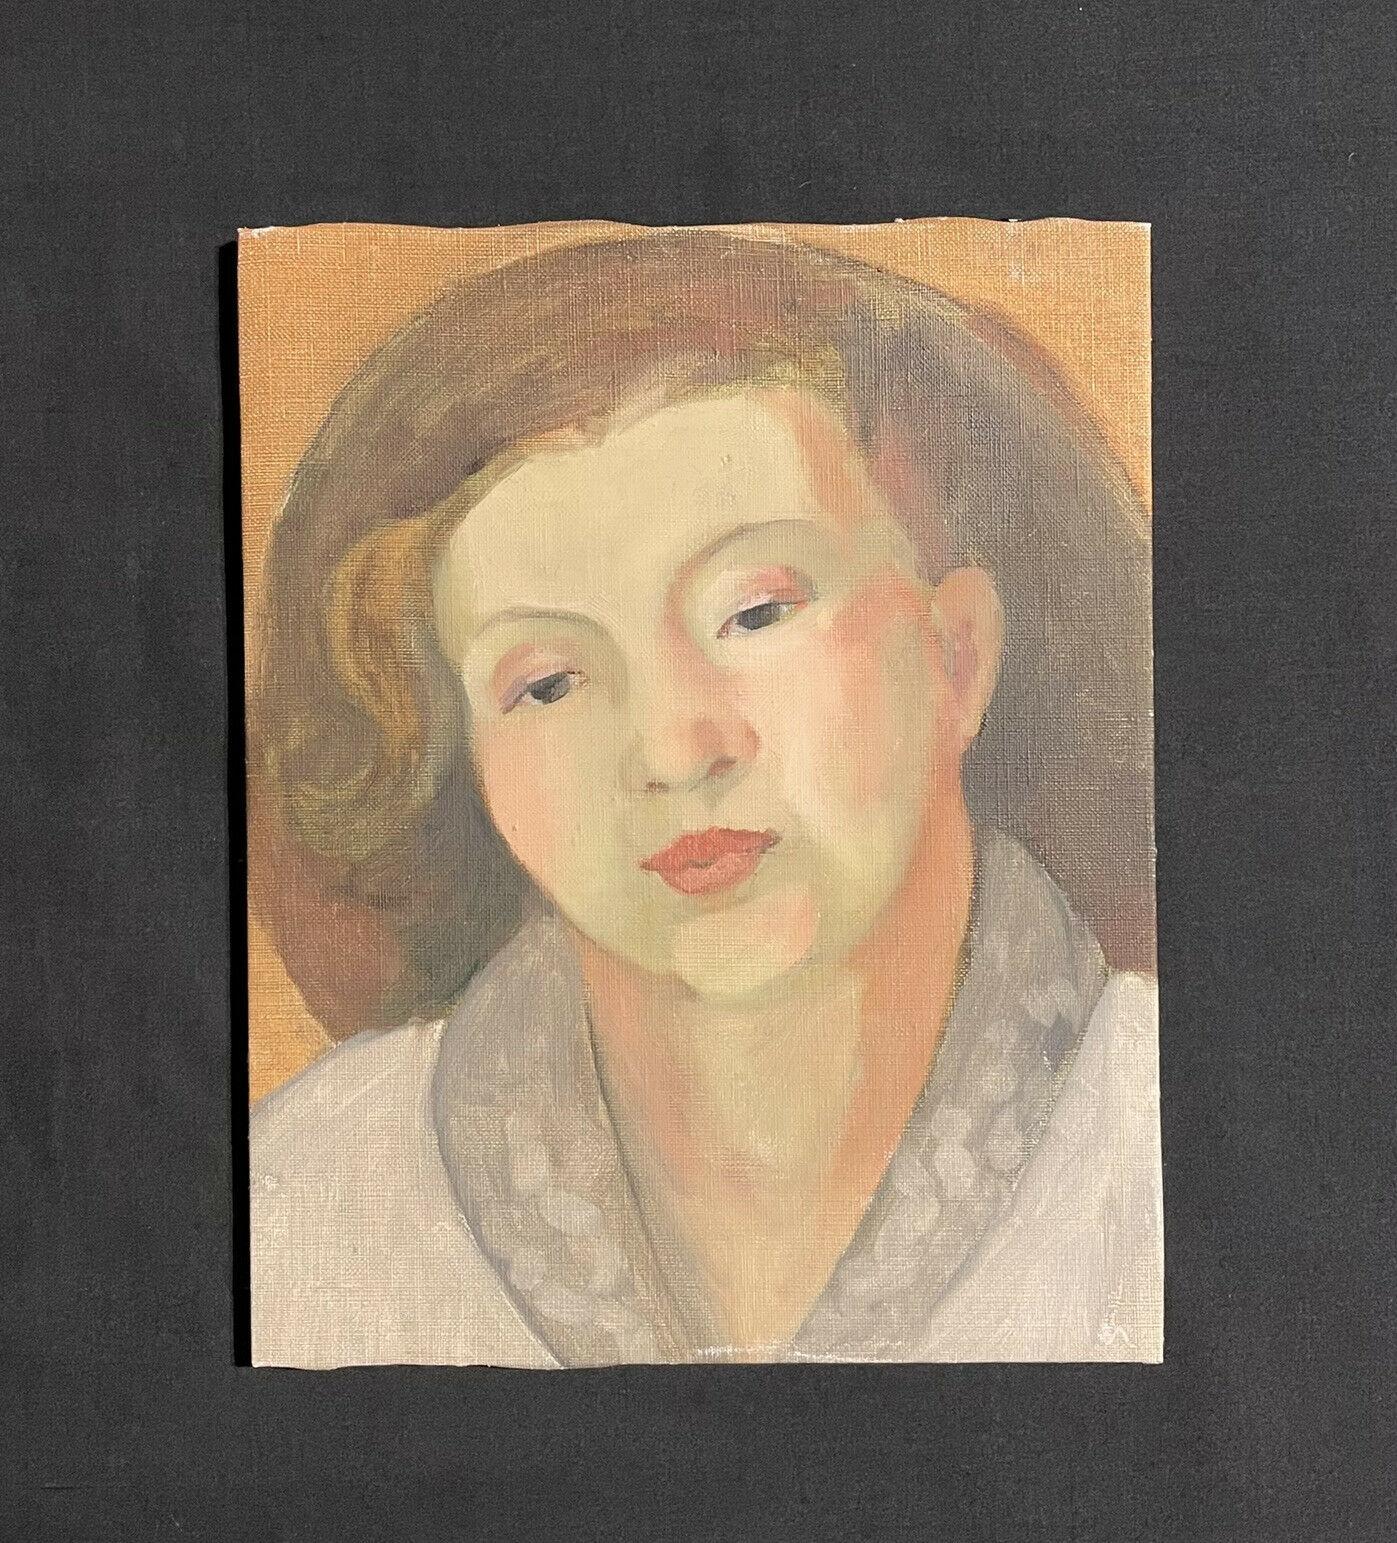 MID 20TH CENTURY FRENCH OIL PAINTING - HEAD & SHOULDERS PORTRAIT YOUNG LADY - Painting by Unknown